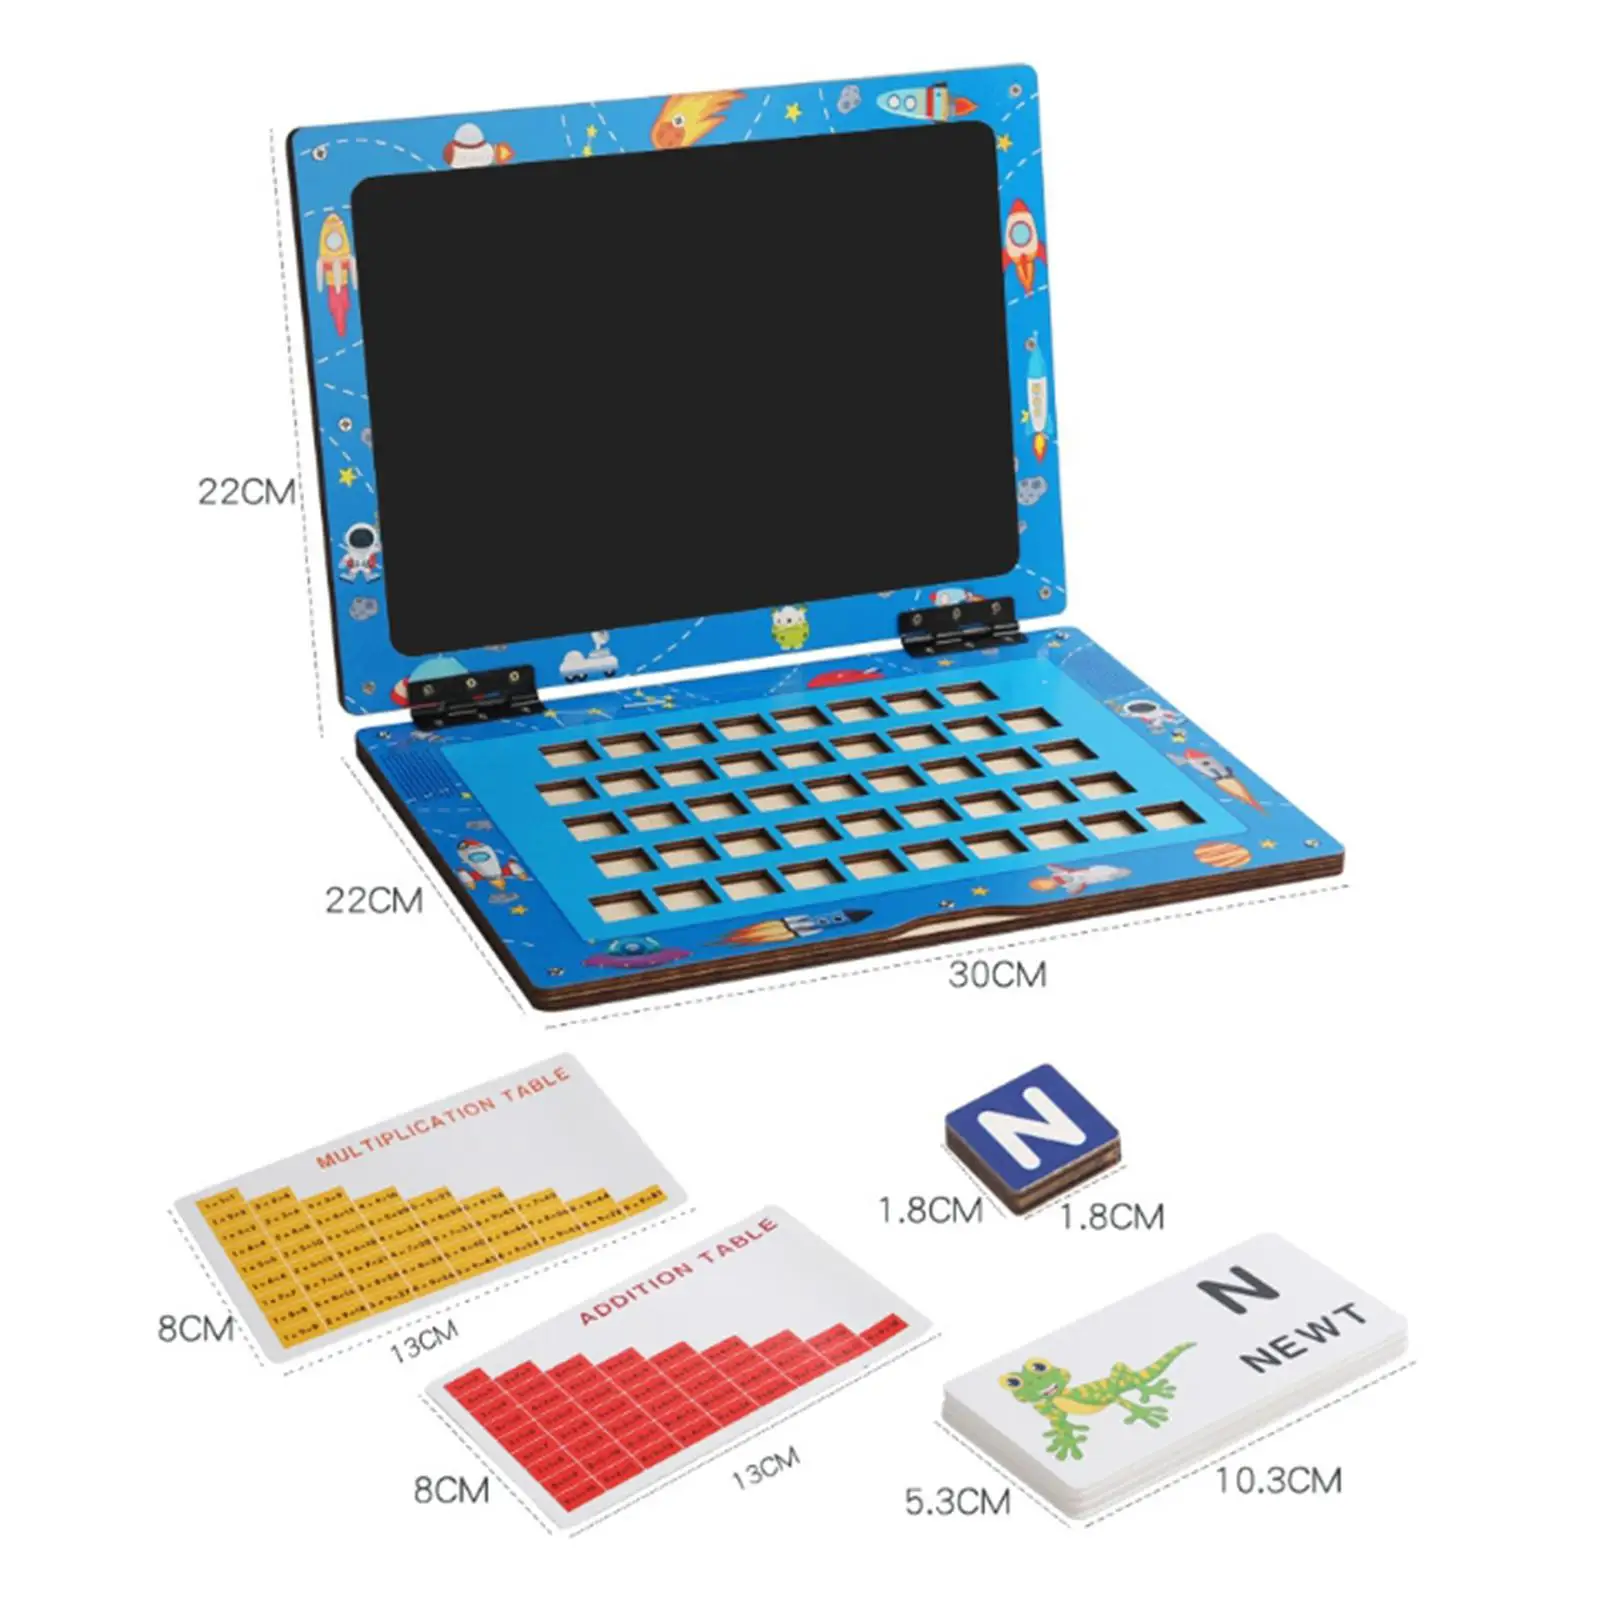  Montessori Toys Teaching Aids Learning Preschool My First Laptop for Kids Boys Girls Birthday Gift Ages 3 4 5 6 7 8 Children 